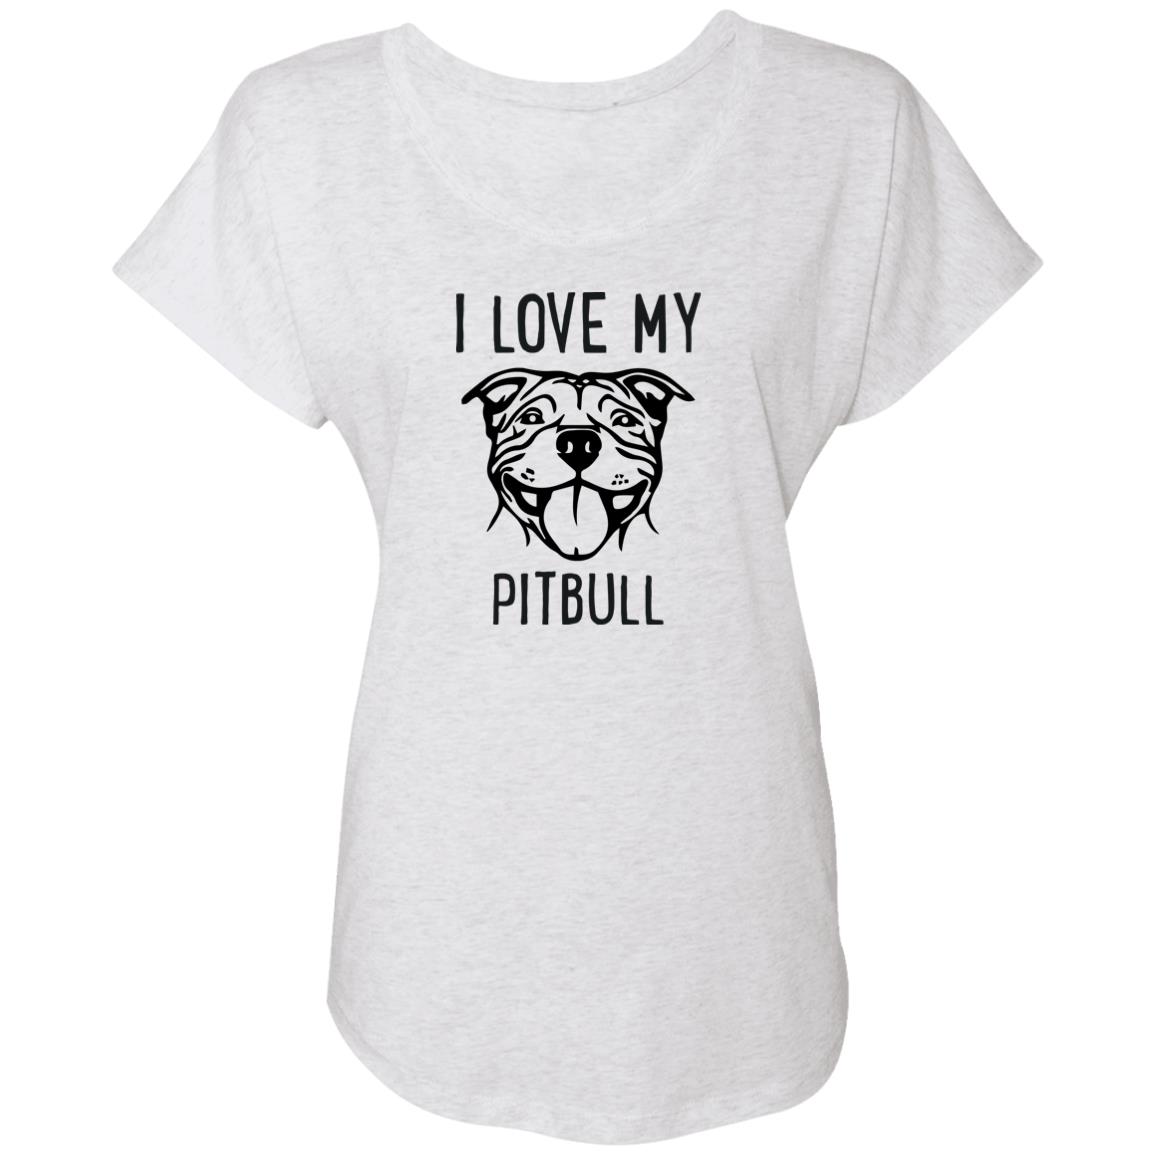 I Love My Pit Bull Slouchy Tee Heather White